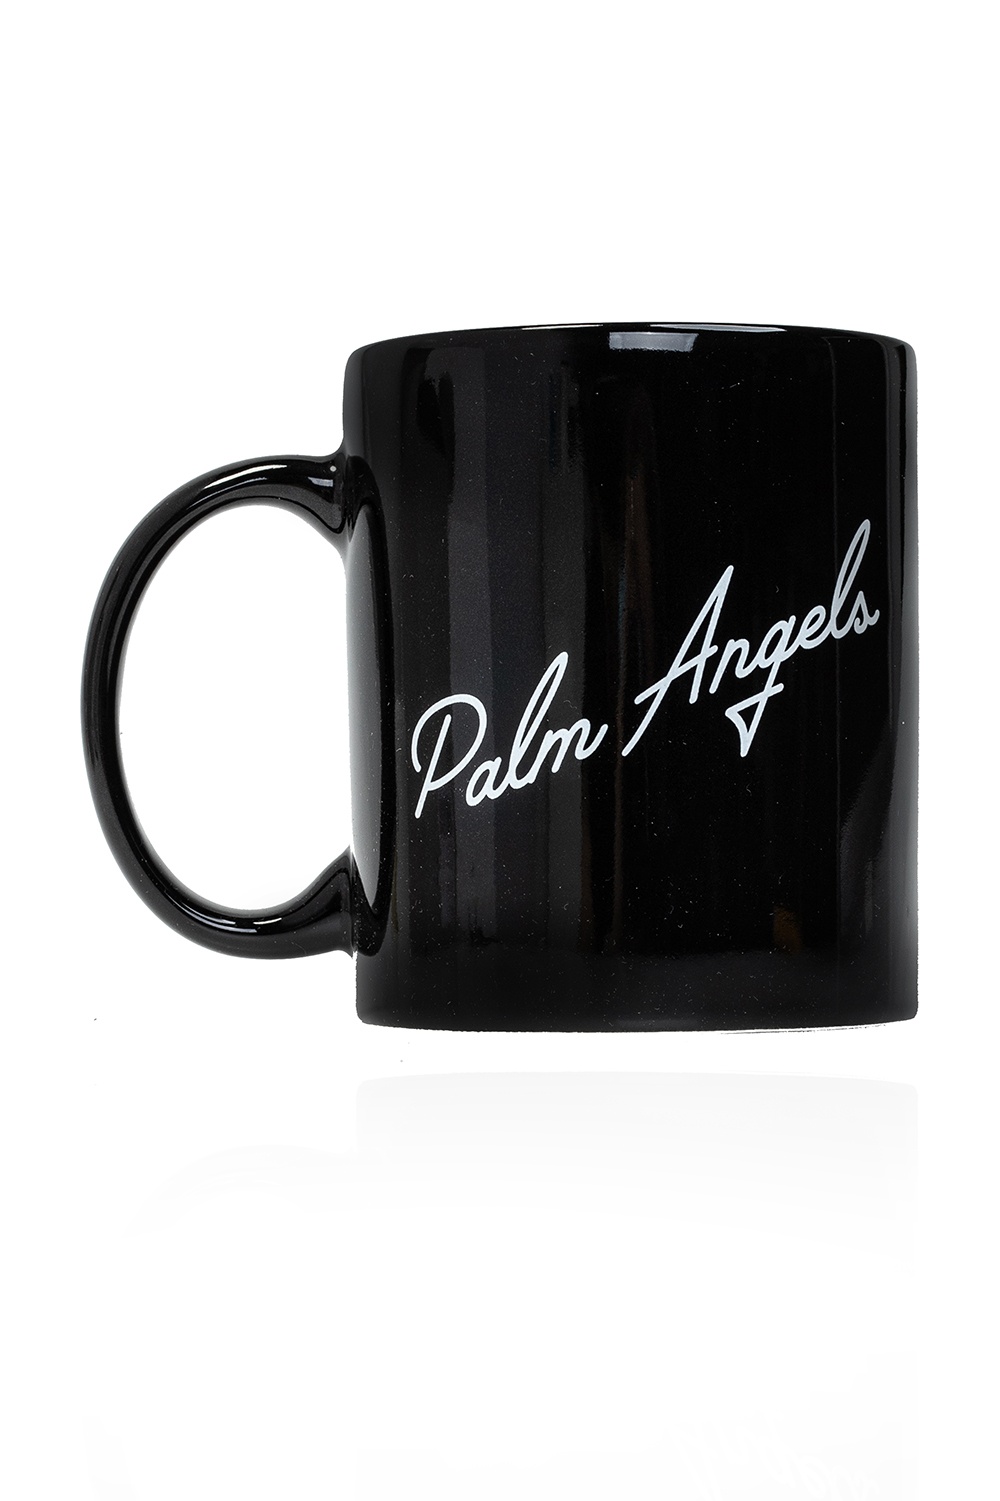 Palm Angels that combines music, art and fashion